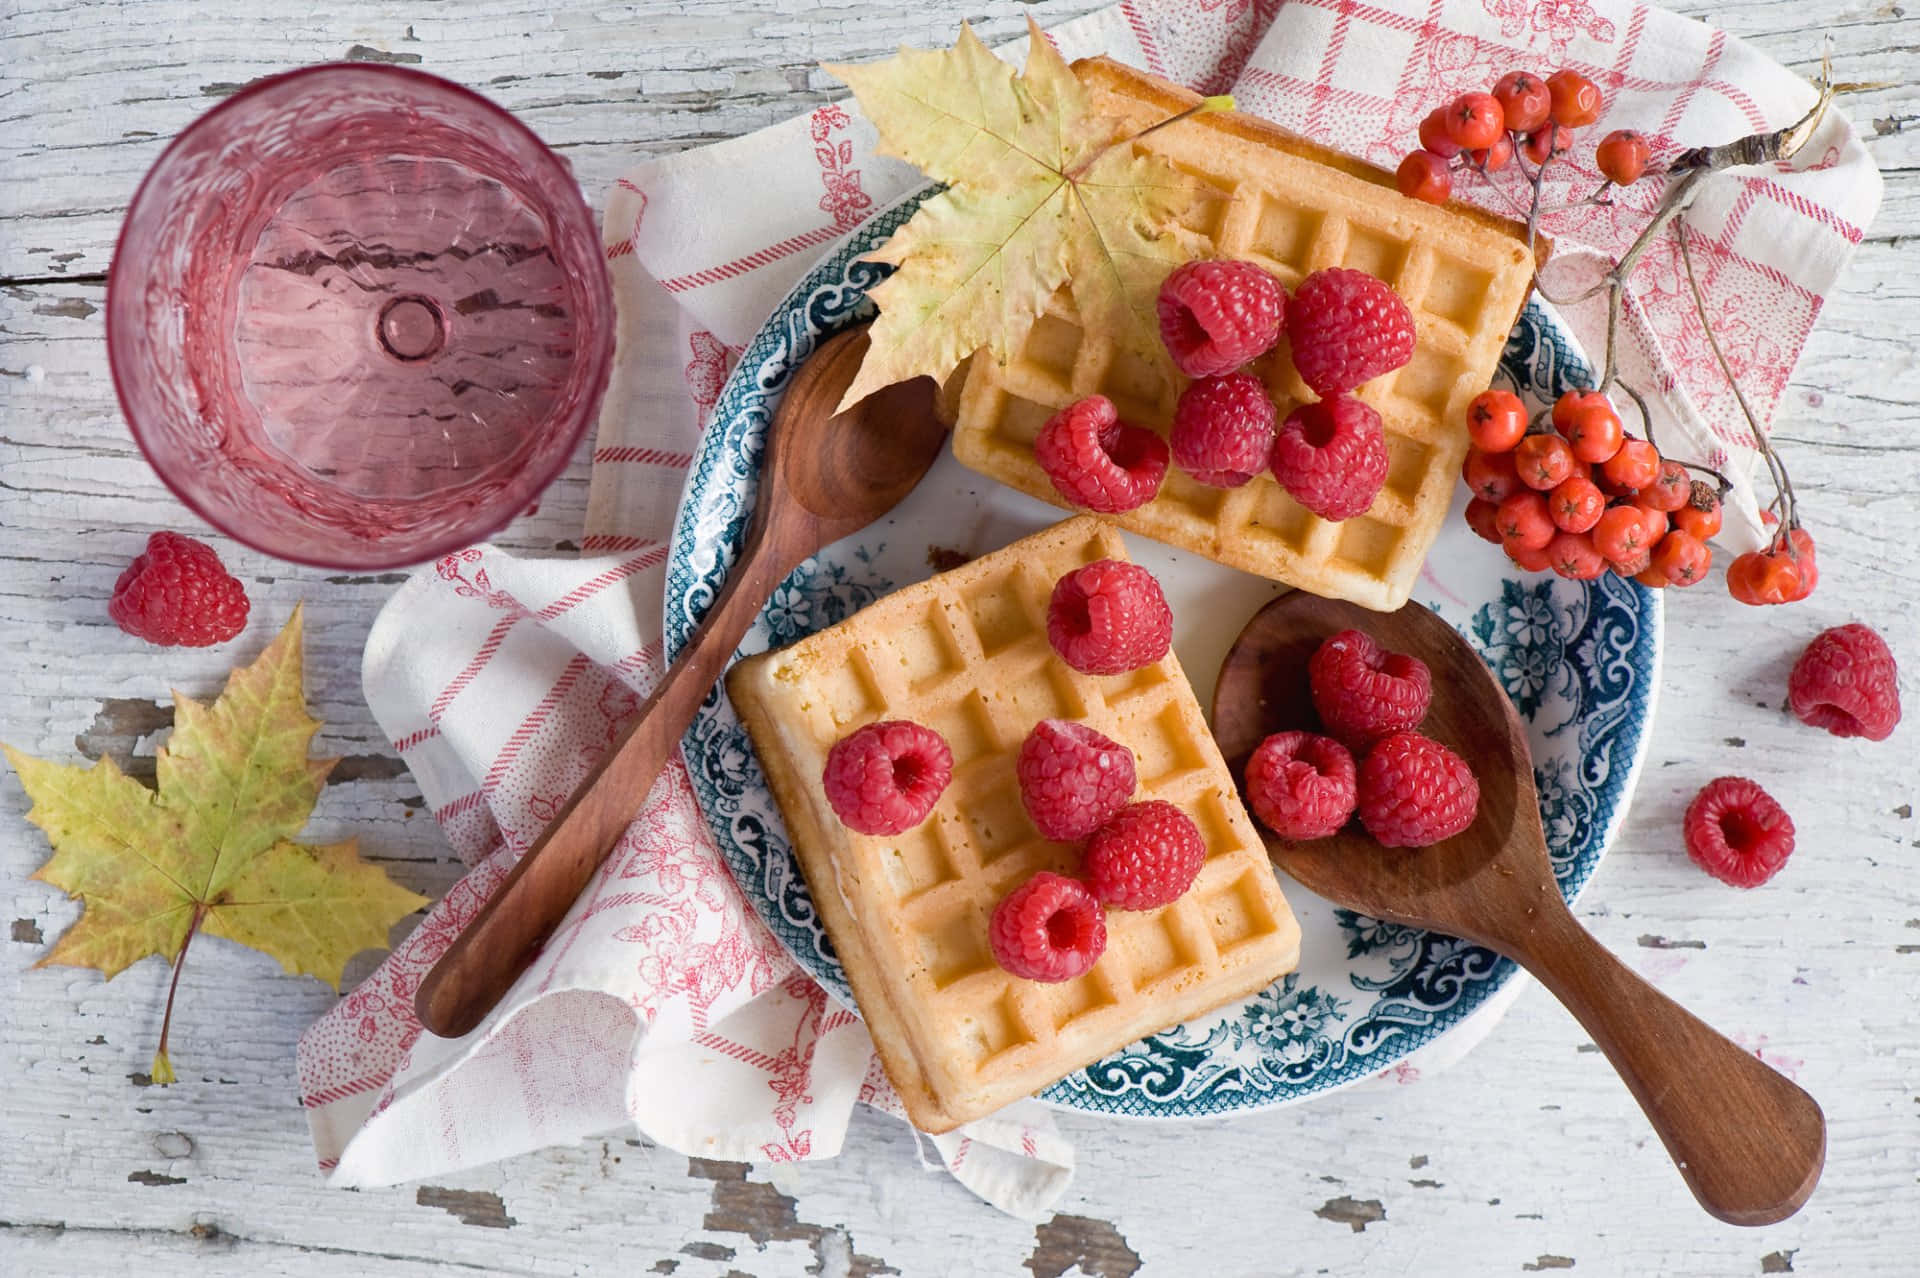 Delicious Golden-Brown Waffle on White Plate